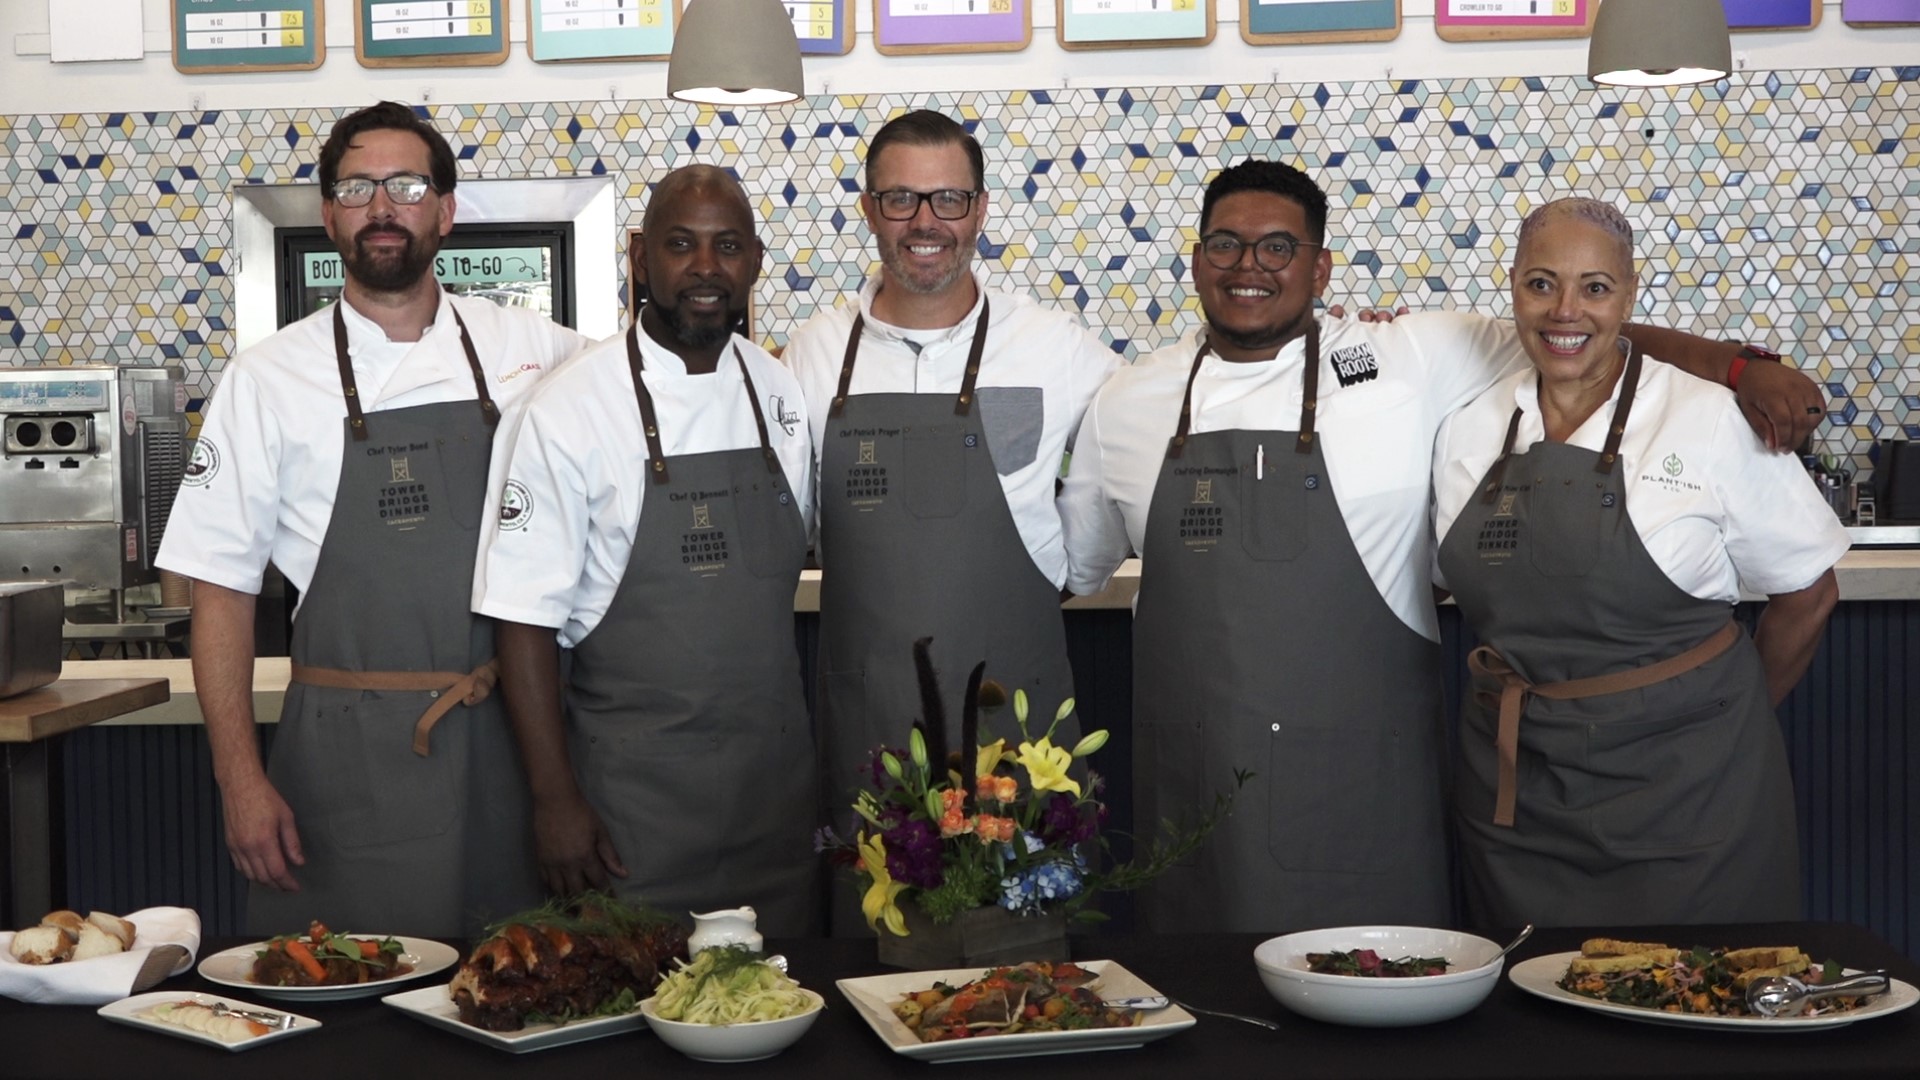 These chefs not only strive to represent themselves with their food, but they strive to represent the city of Sacramento and its growth.